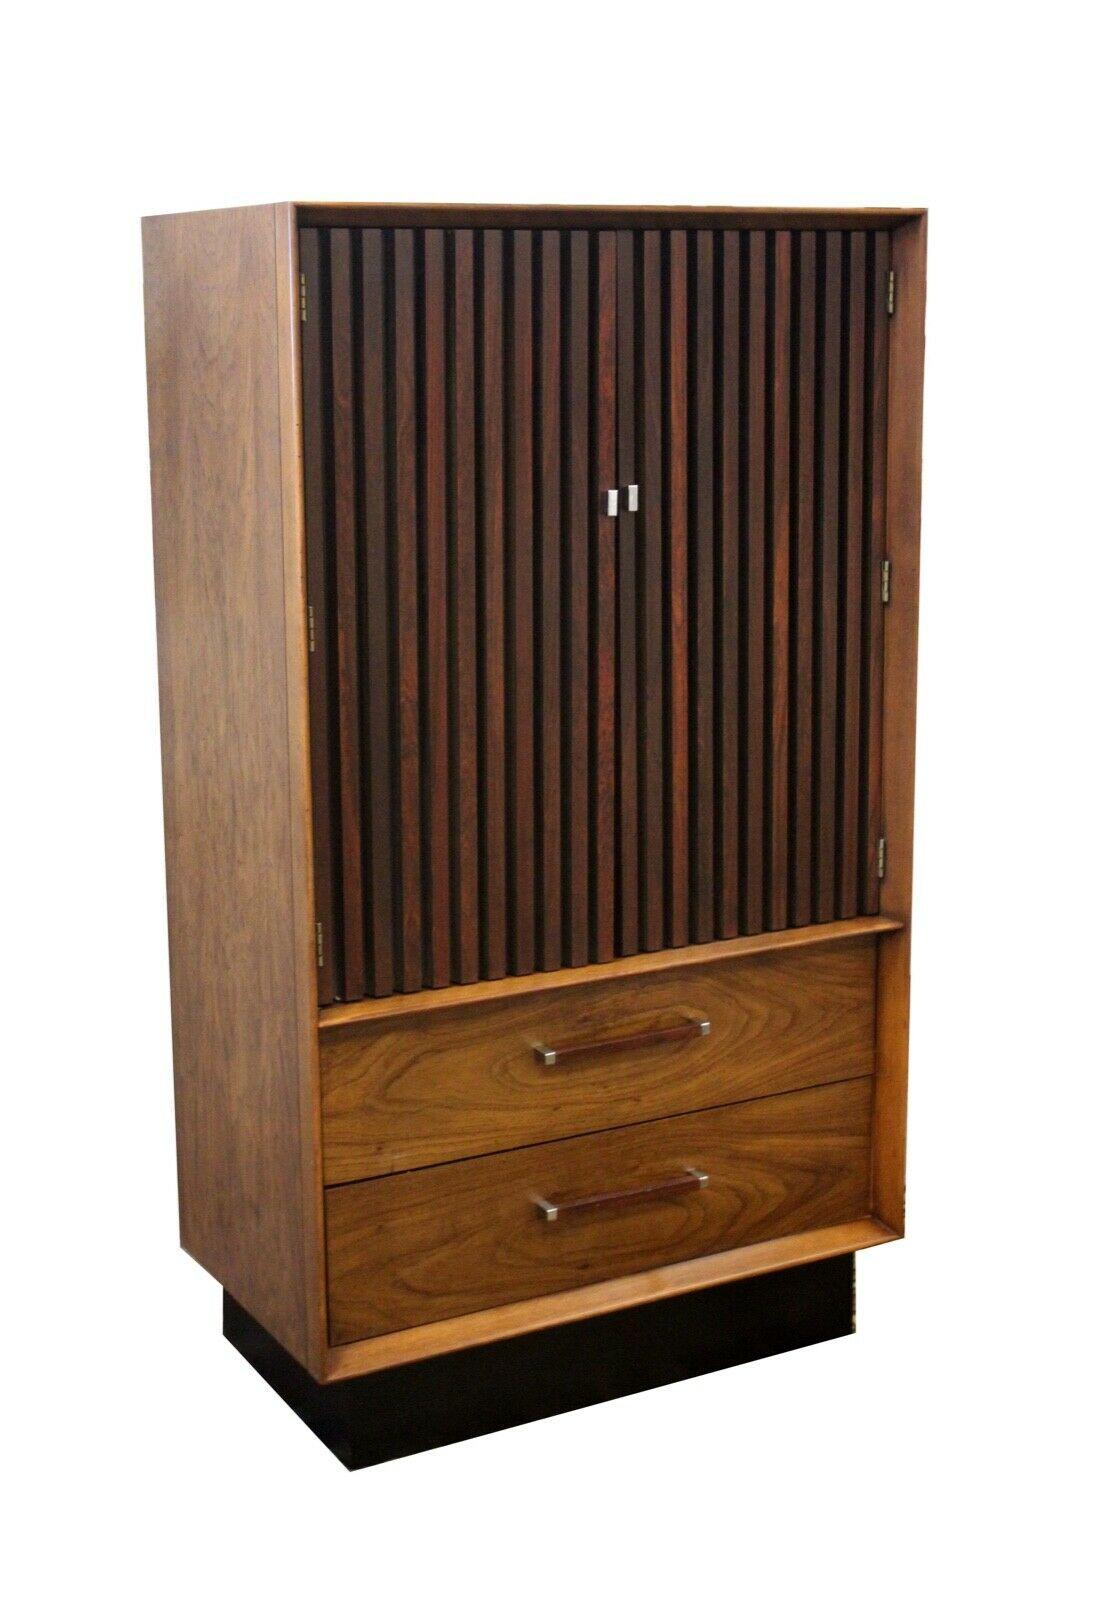 From Le Shoppe Too in Michigan comes this wonderful vintage modern armoire tallboy or gentleman's chest with storage. Known as the Lane 'Tower' Suite, this unique two-tone design with walnut casing and rosewood accents offers both beauty as well as